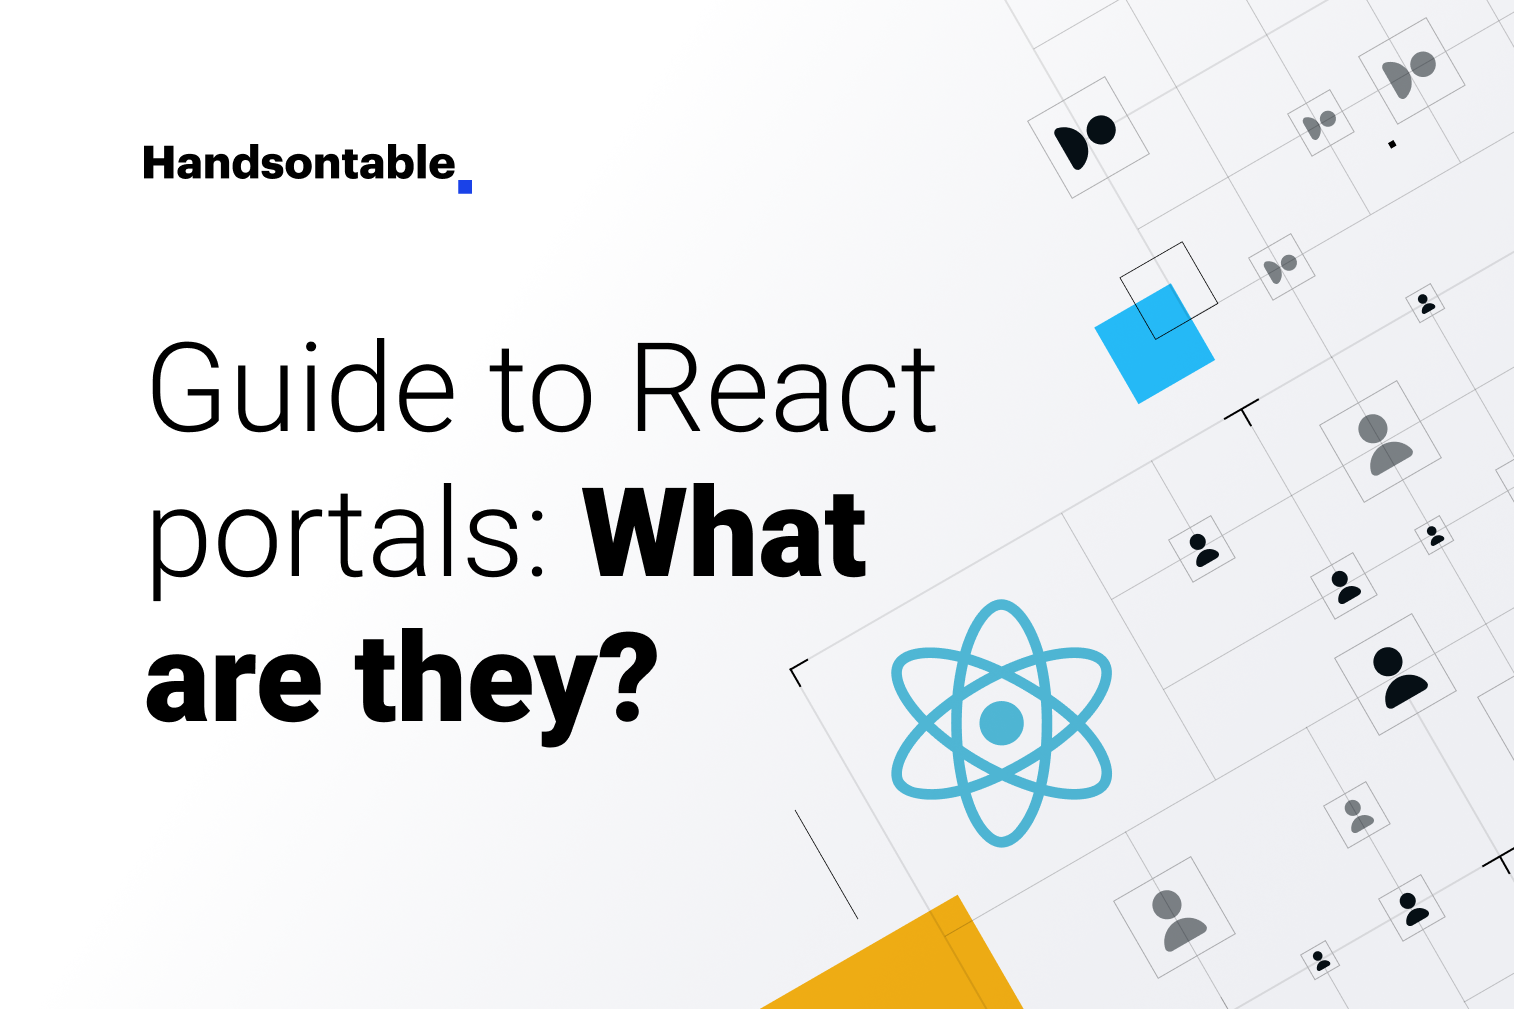 Guide to React portals: What are they?